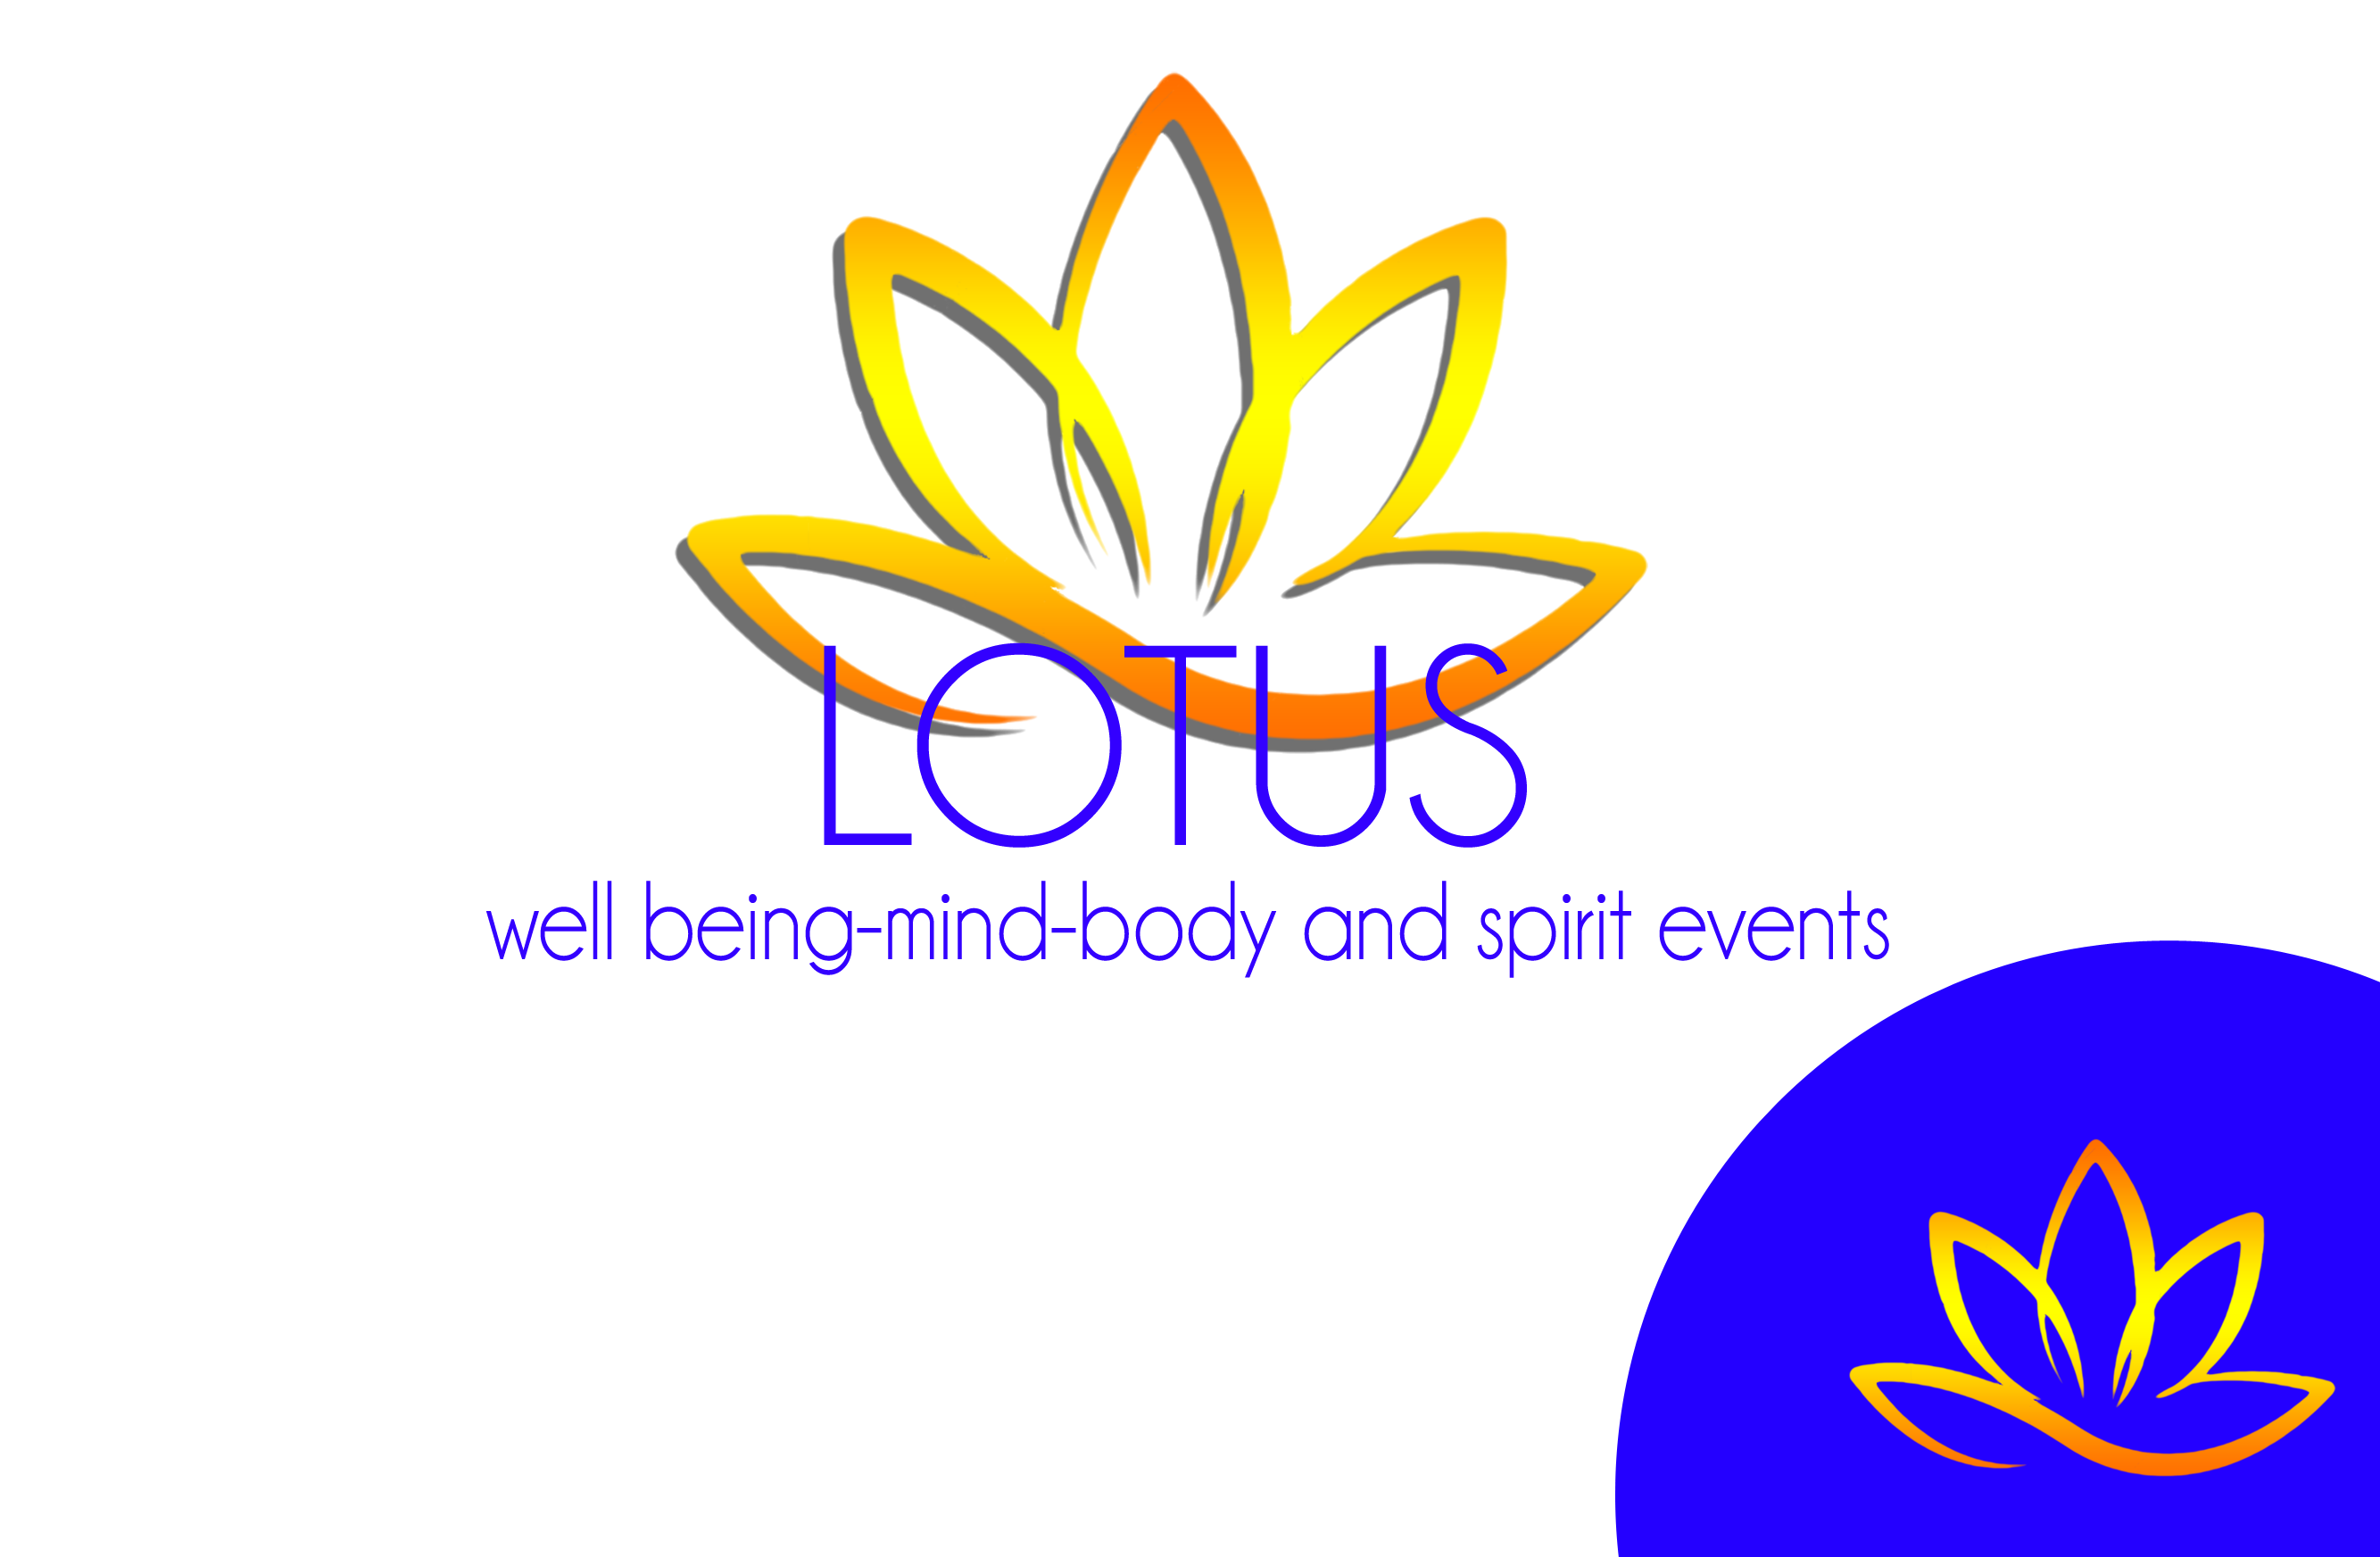 Lotus well-being